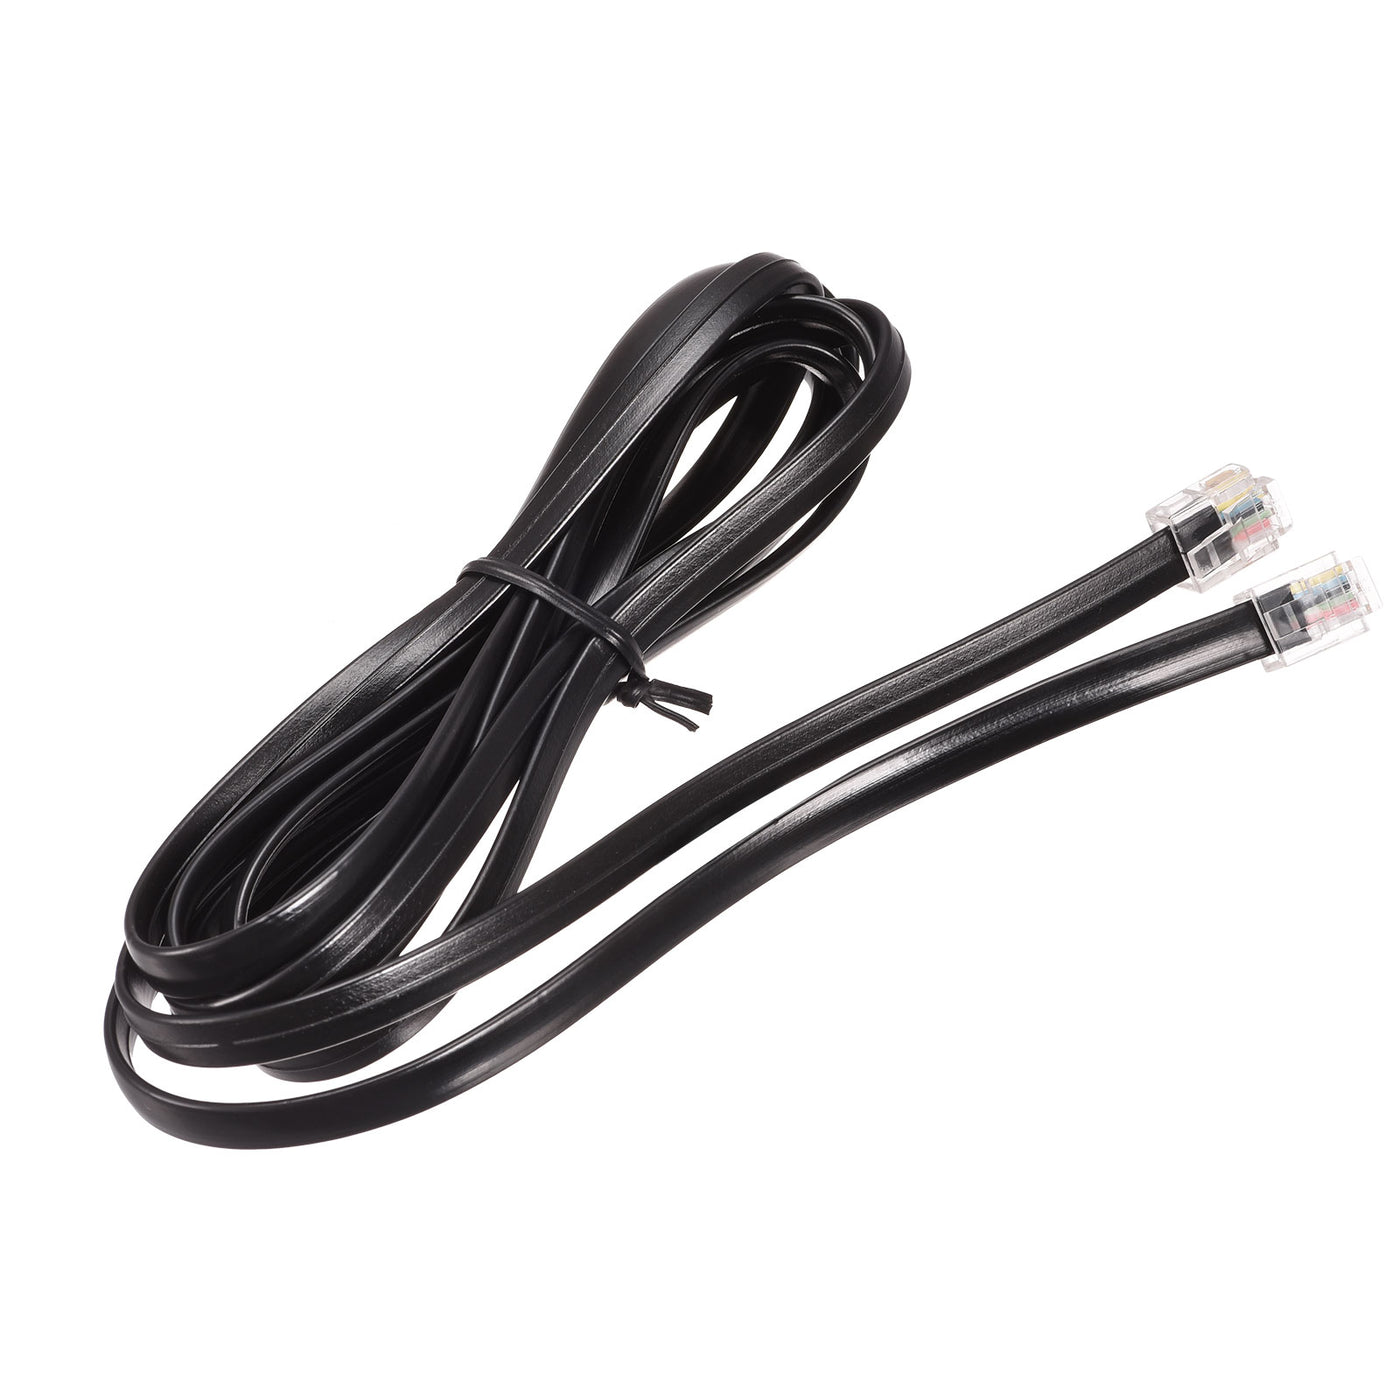 Harfington Phone Extension Cord Telephone Cable Phone Line Cord RJ11 6P6C Plugs, Male to Male for Phone and Fax 2pcs